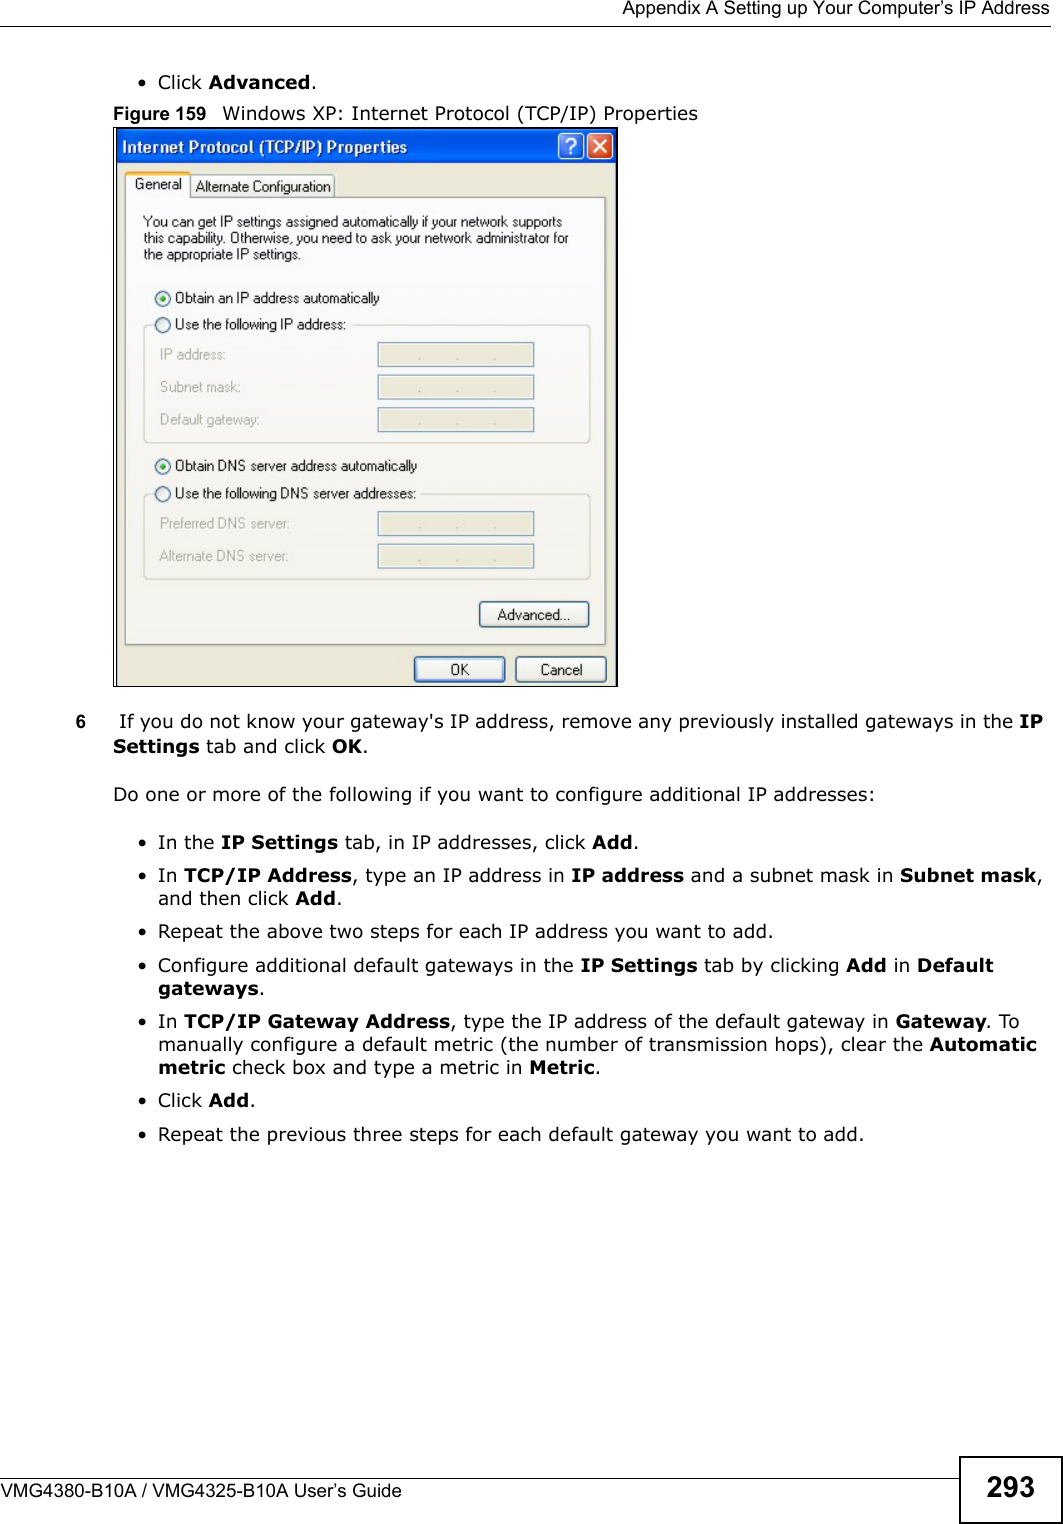  Appendix A Setting up Your Computer’s IP AddressVMG4380-B10A / VMG4325-B10A User’s Guide 293• Click Advanced.Figure 159  Windows XP: Internet Protocol (TCP/IP) Properties6If you do not know your gateway&apos;s IP address, remove any previously installed gateways in the IP Settings tab and click OK.Do one or more of the following if you want to configure additional IP addresses:• In the IP Settings tab, in IP addresses, click Add.• In TCP/IP Address, type an IP address in IP address and a subnet mask in Subnet mask, and then click Add.• Repeat the above two steps for each IP address you want to add.• Configure additional default gateways in the IP Settings tab by clicking Add in Default gateways.• In TCP/IP Gateway Address, type the IP address of the default gateway in Gateway. Tomanually configure a default metric (the number of transmission hops), clear the Automatic metric check box and type a metric in Metric.• Click Add. • Repeat the previous three steps for each default gateway you want to add.